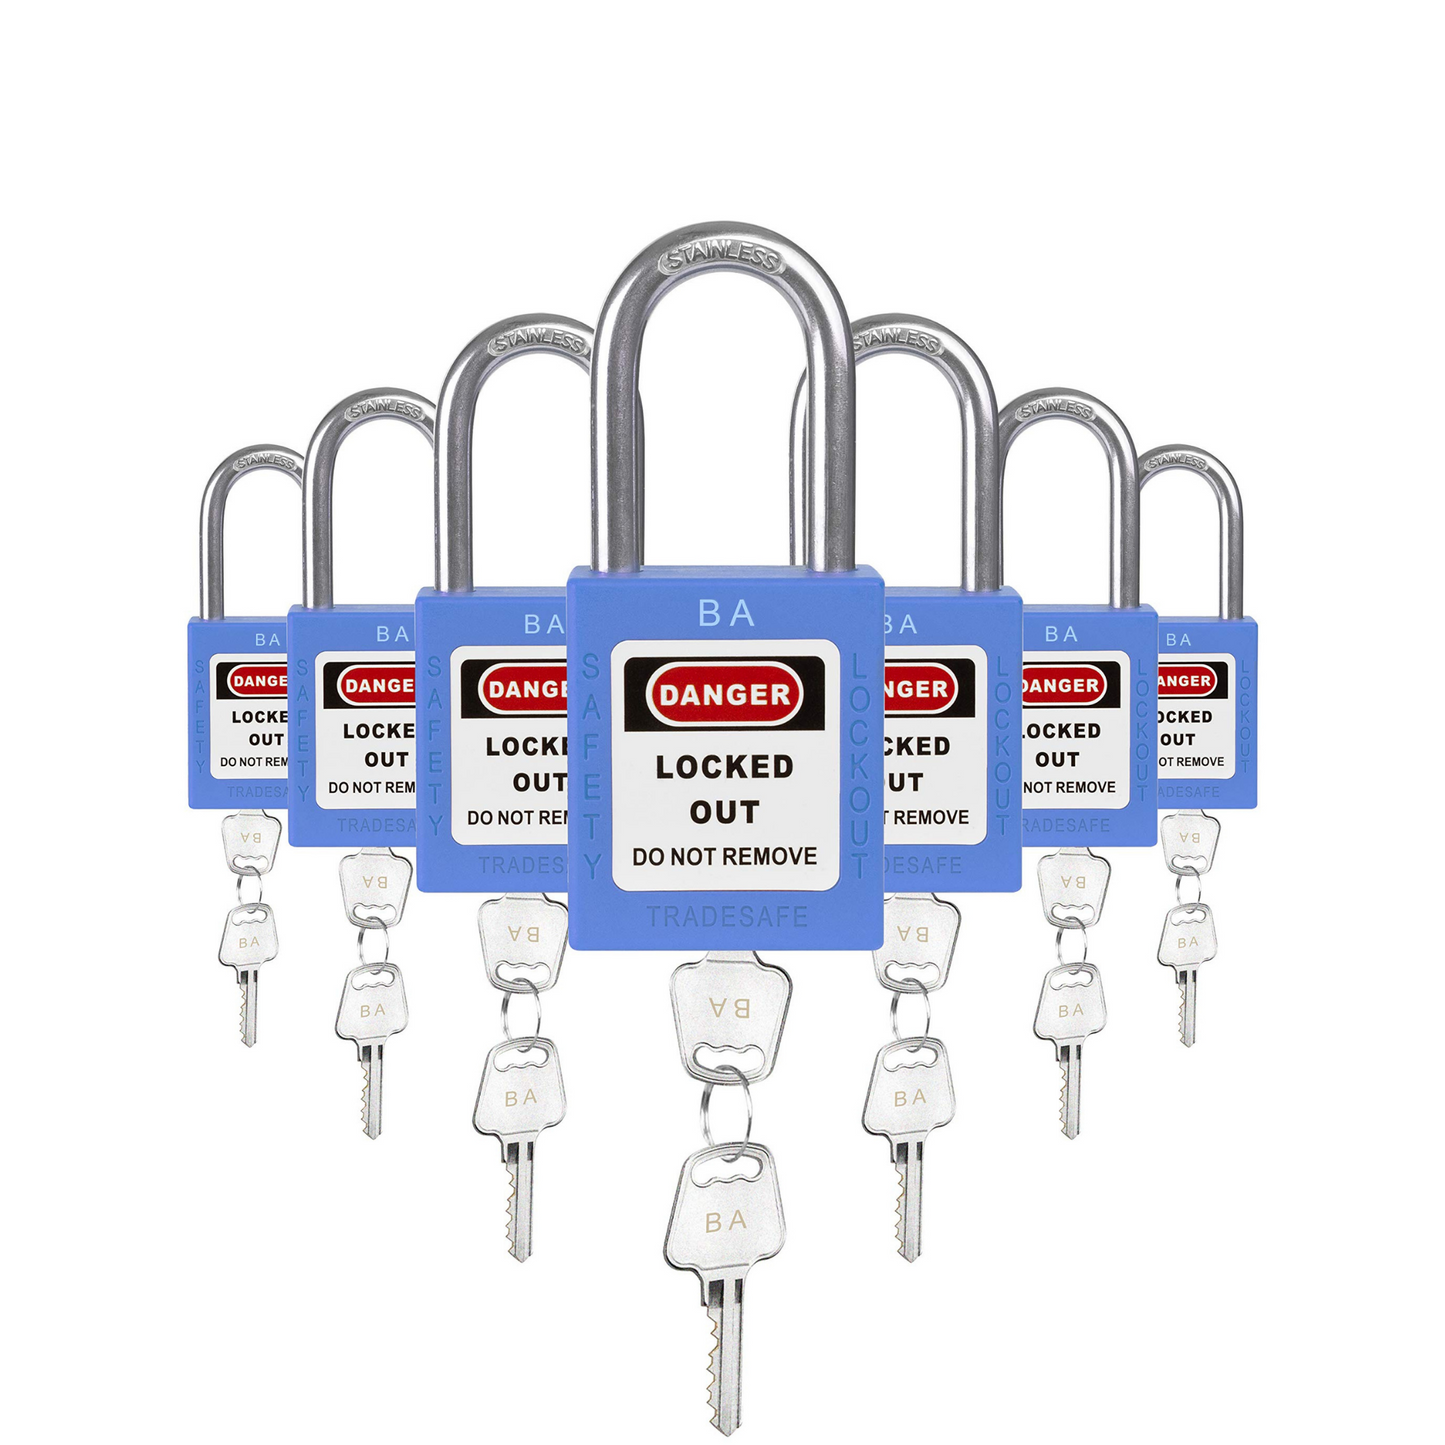 seven blue loto padlocks, each with two keys and a BA letter code on both the lock body and the keys